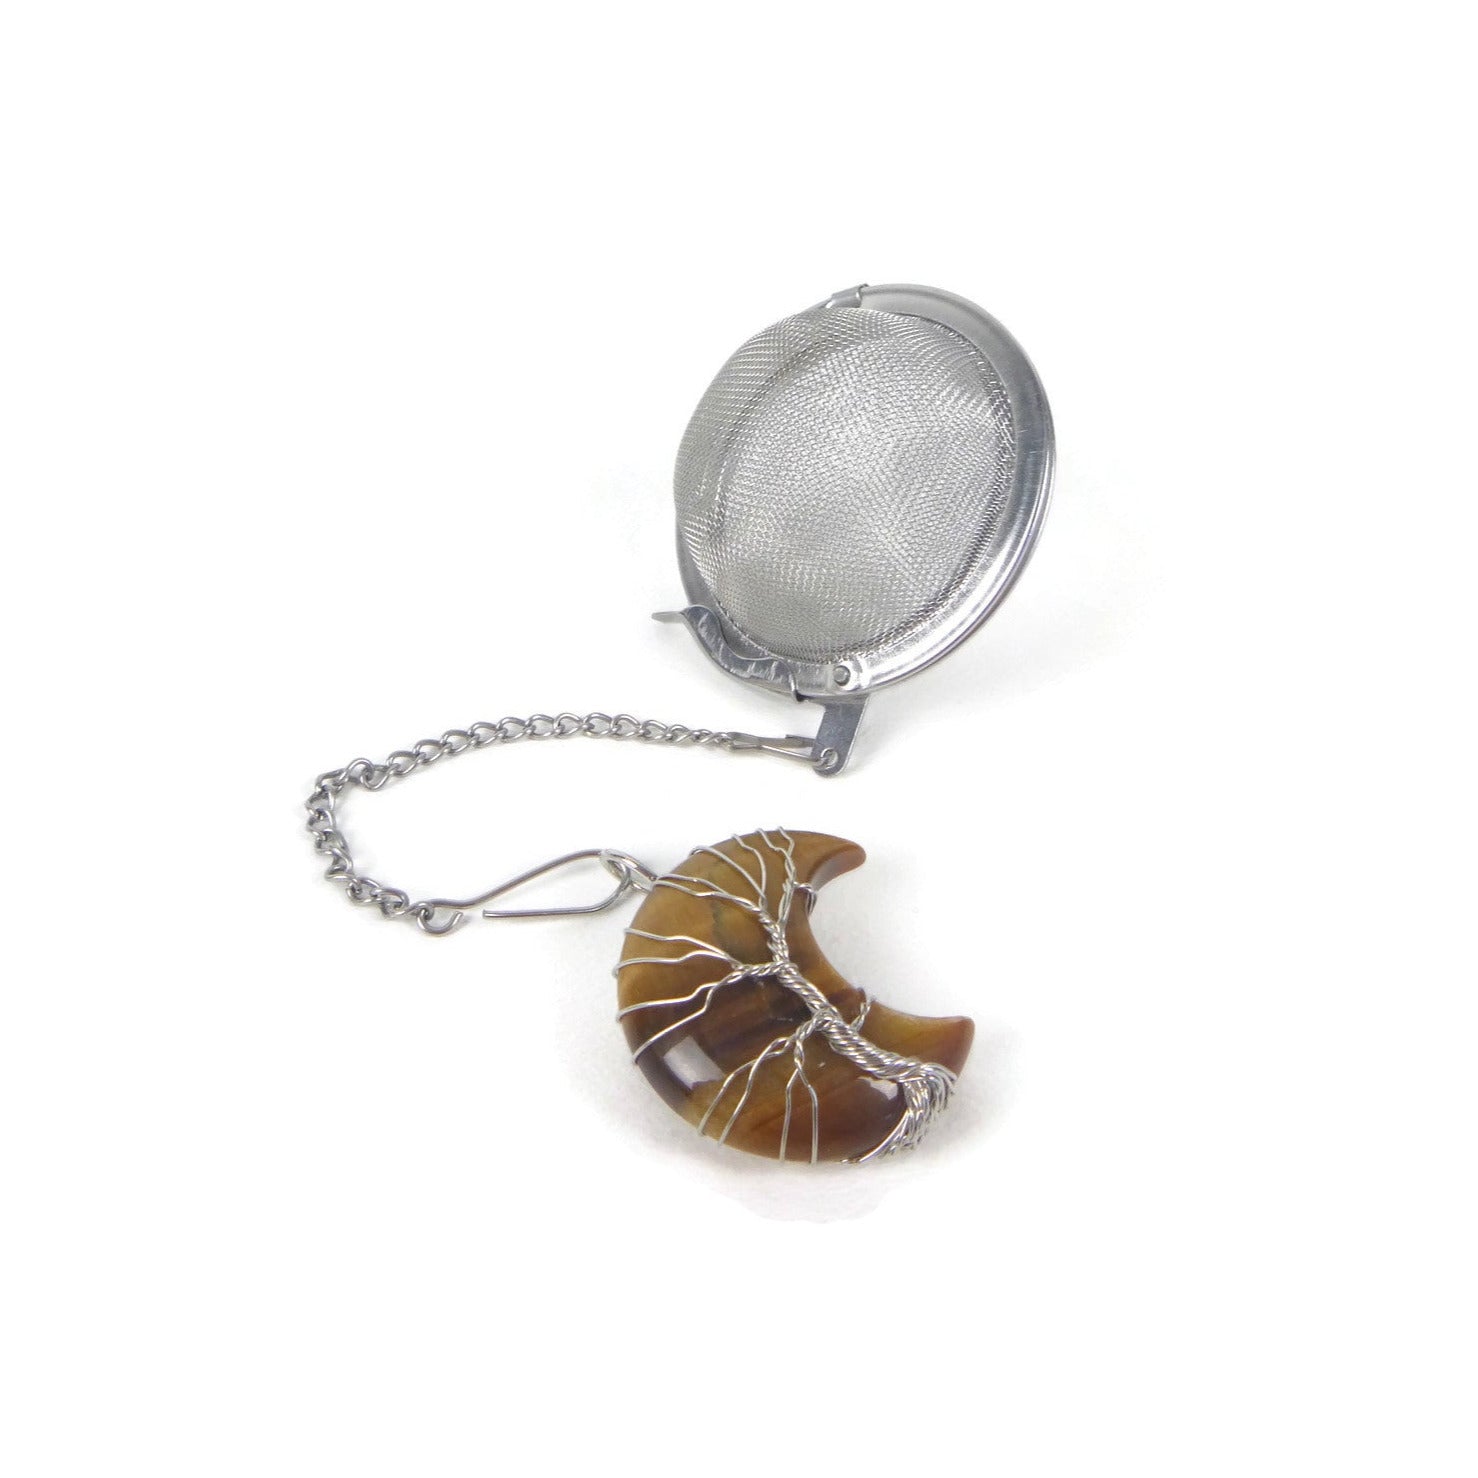 Tea Infuser with Tiger's Eye Crescent Moon Charm